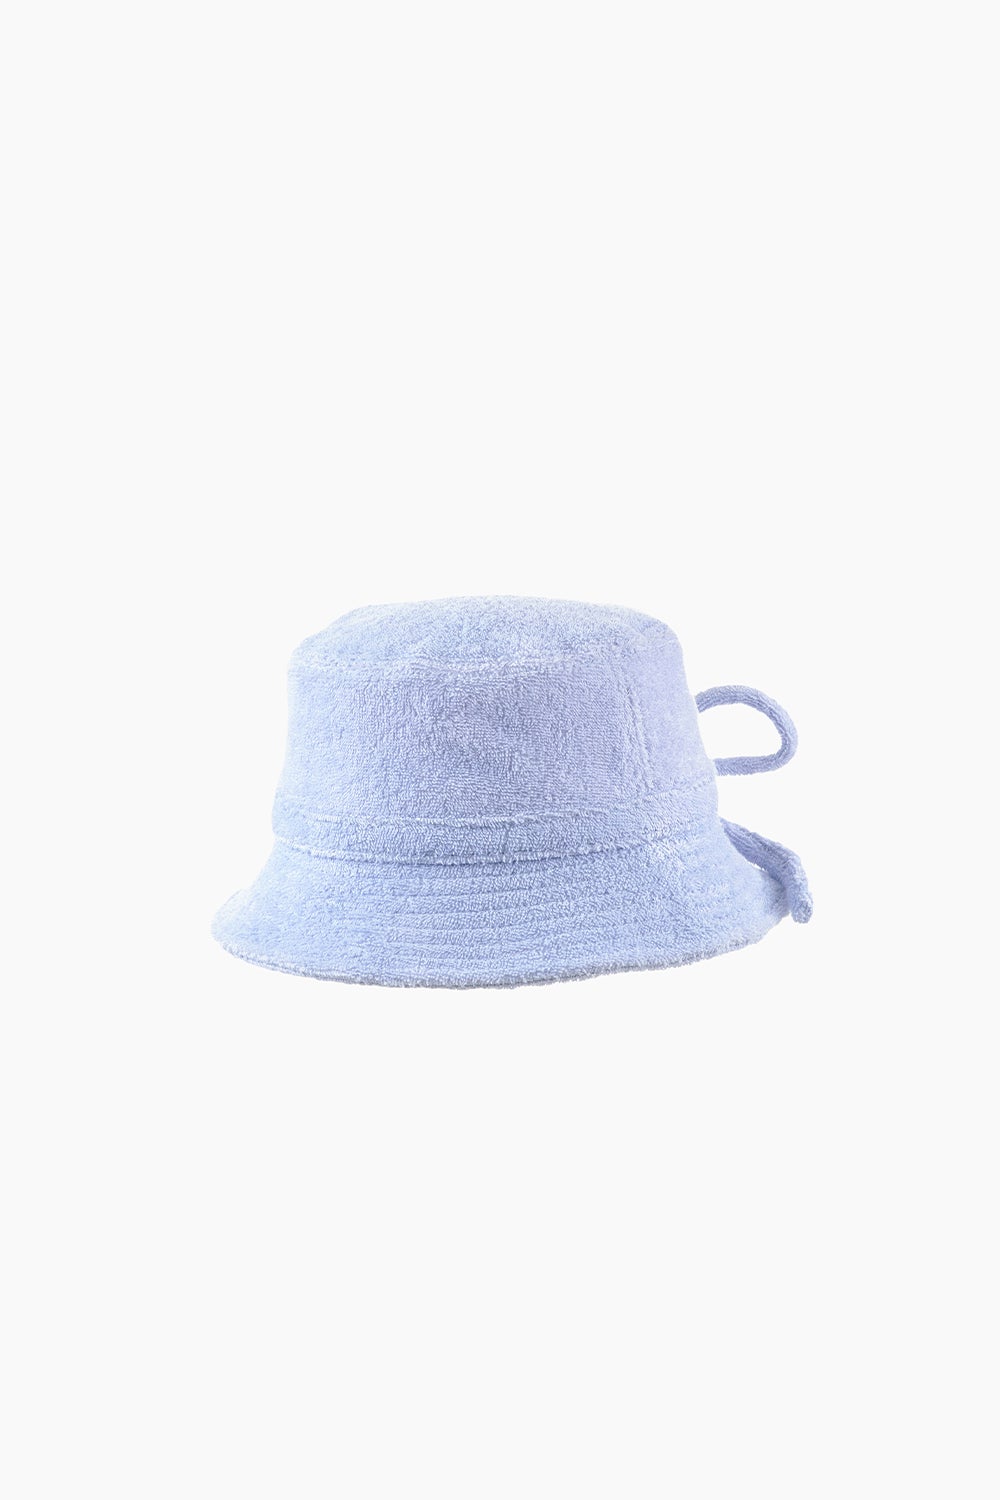 Levi's Terry Bucket Hat with Poster Logo Light Blue